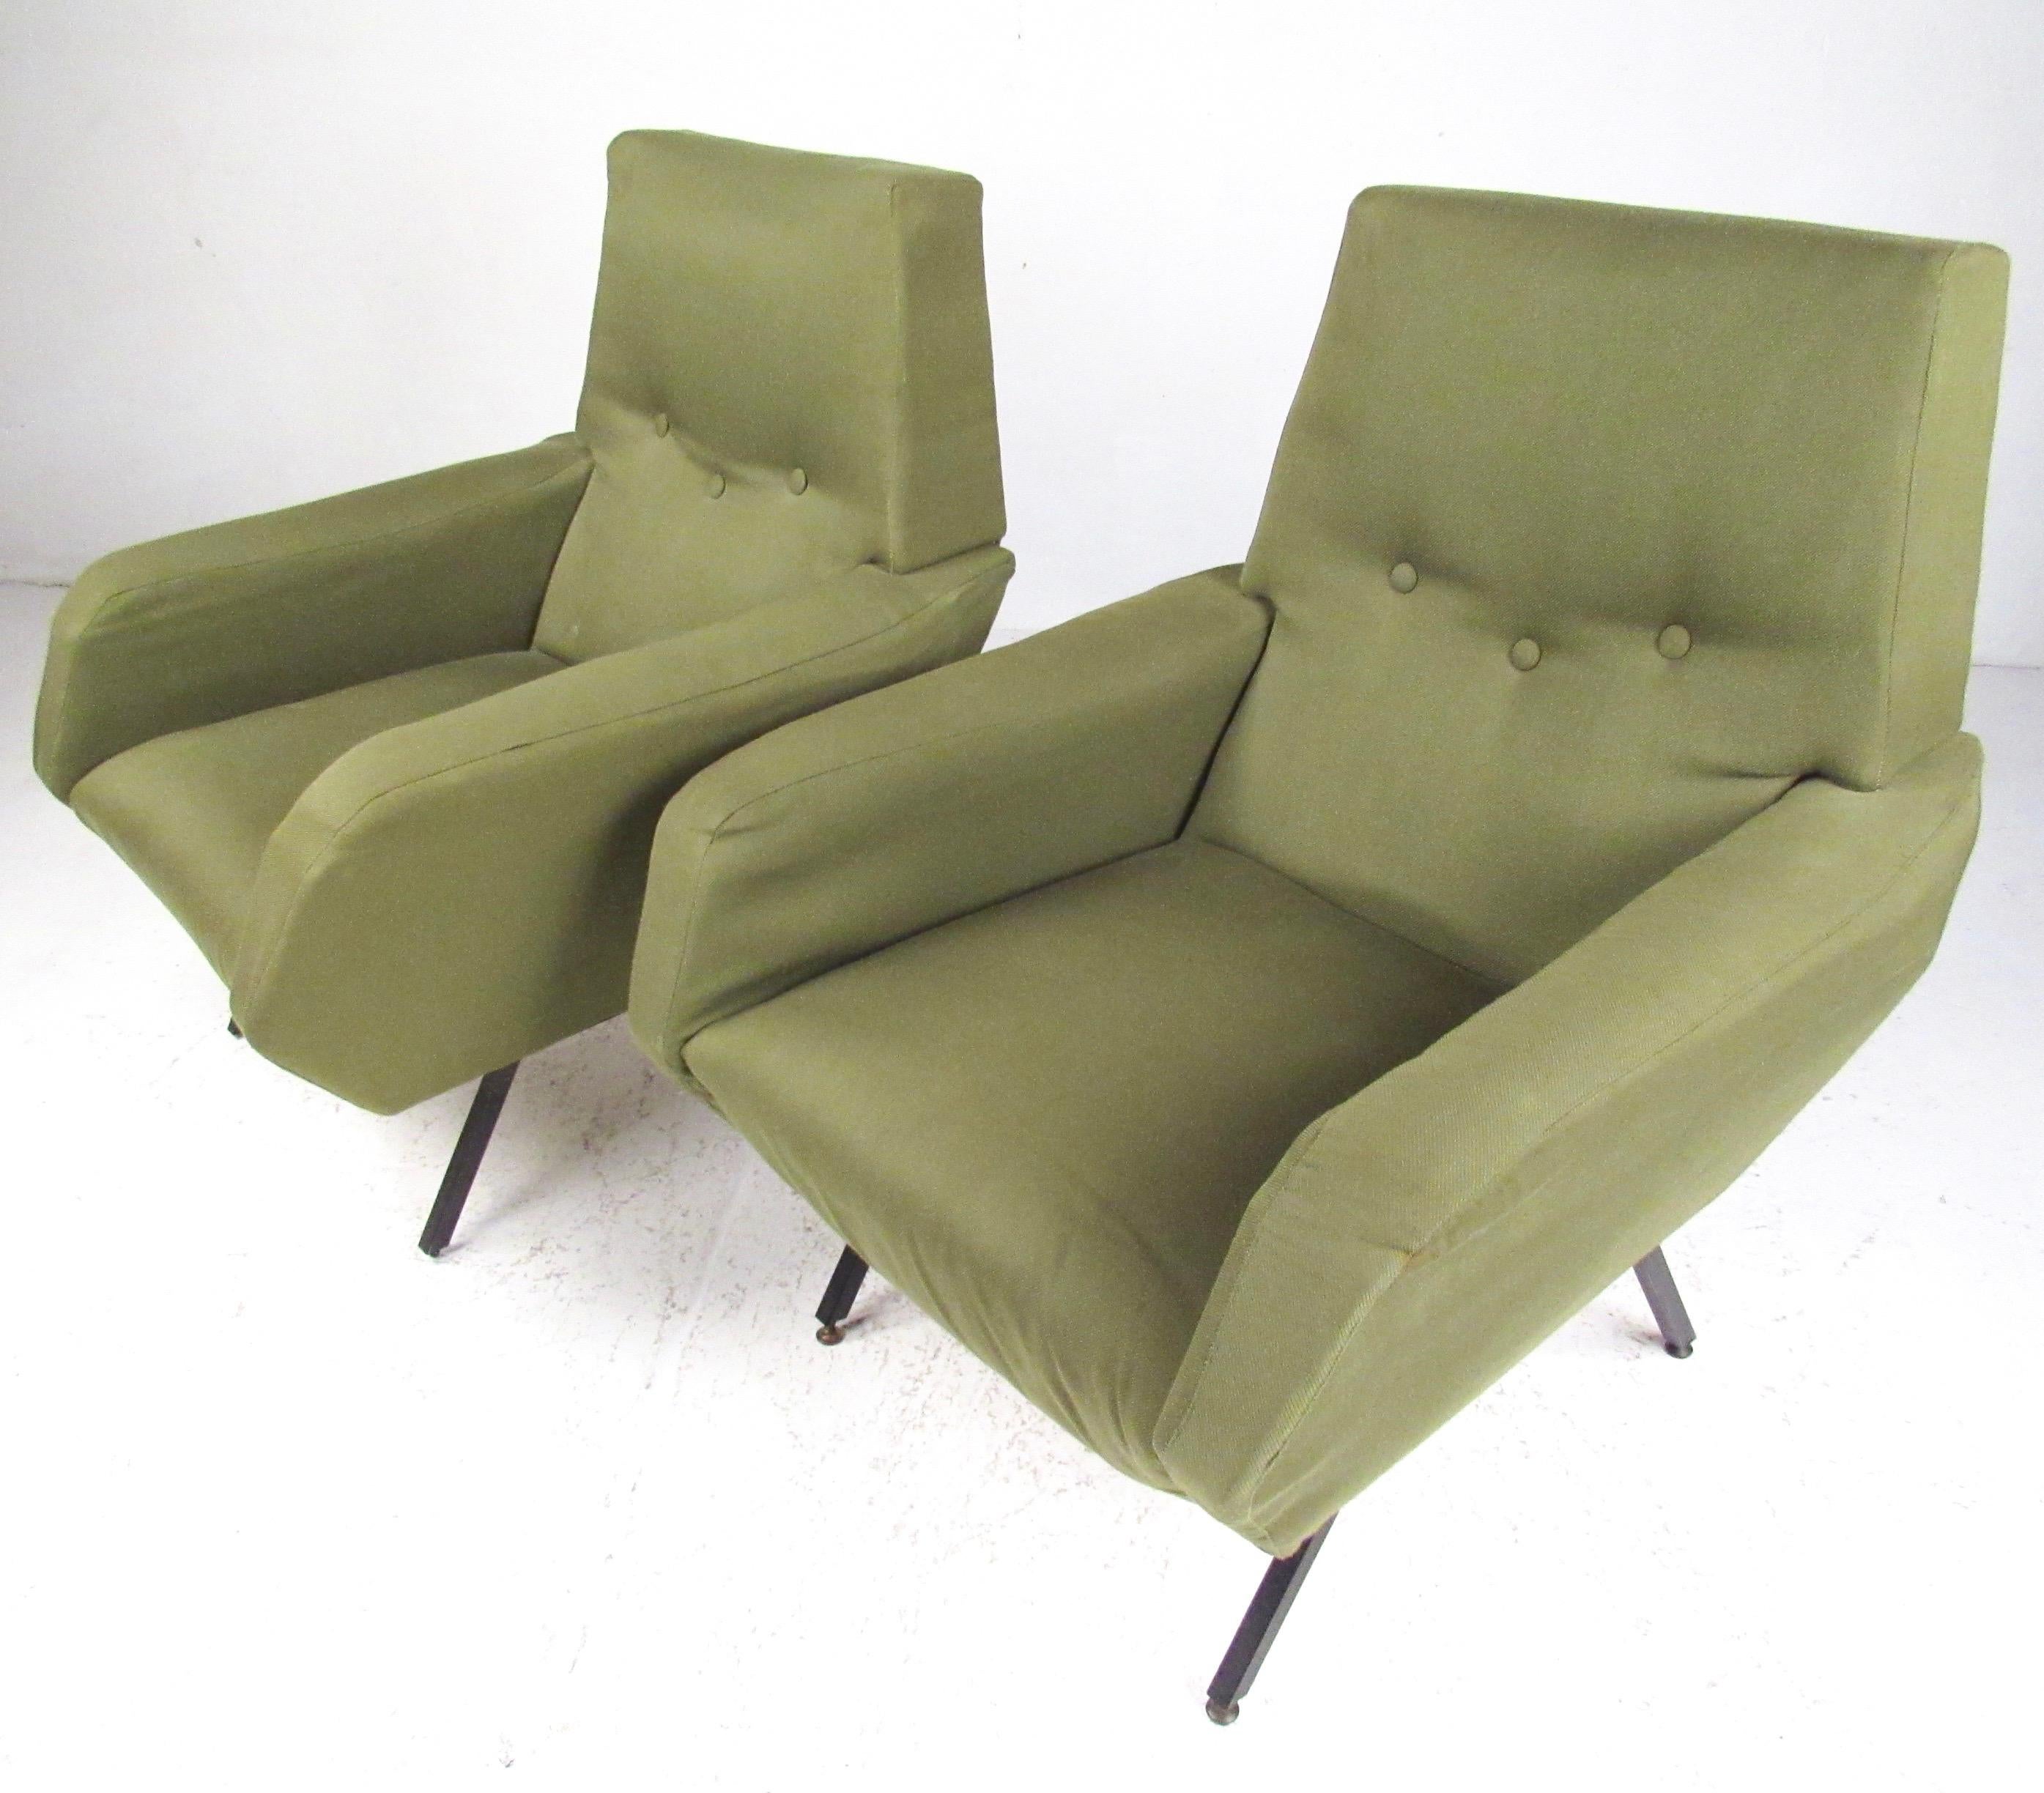 This striking pair of Osvaldo Borsani style lounge chairs feature sculptural Italian modern design combined with timeless comfort. Upholstered in vintage covering the matching midcentury pair of lounge chairs feature metal legs with sculpted seat